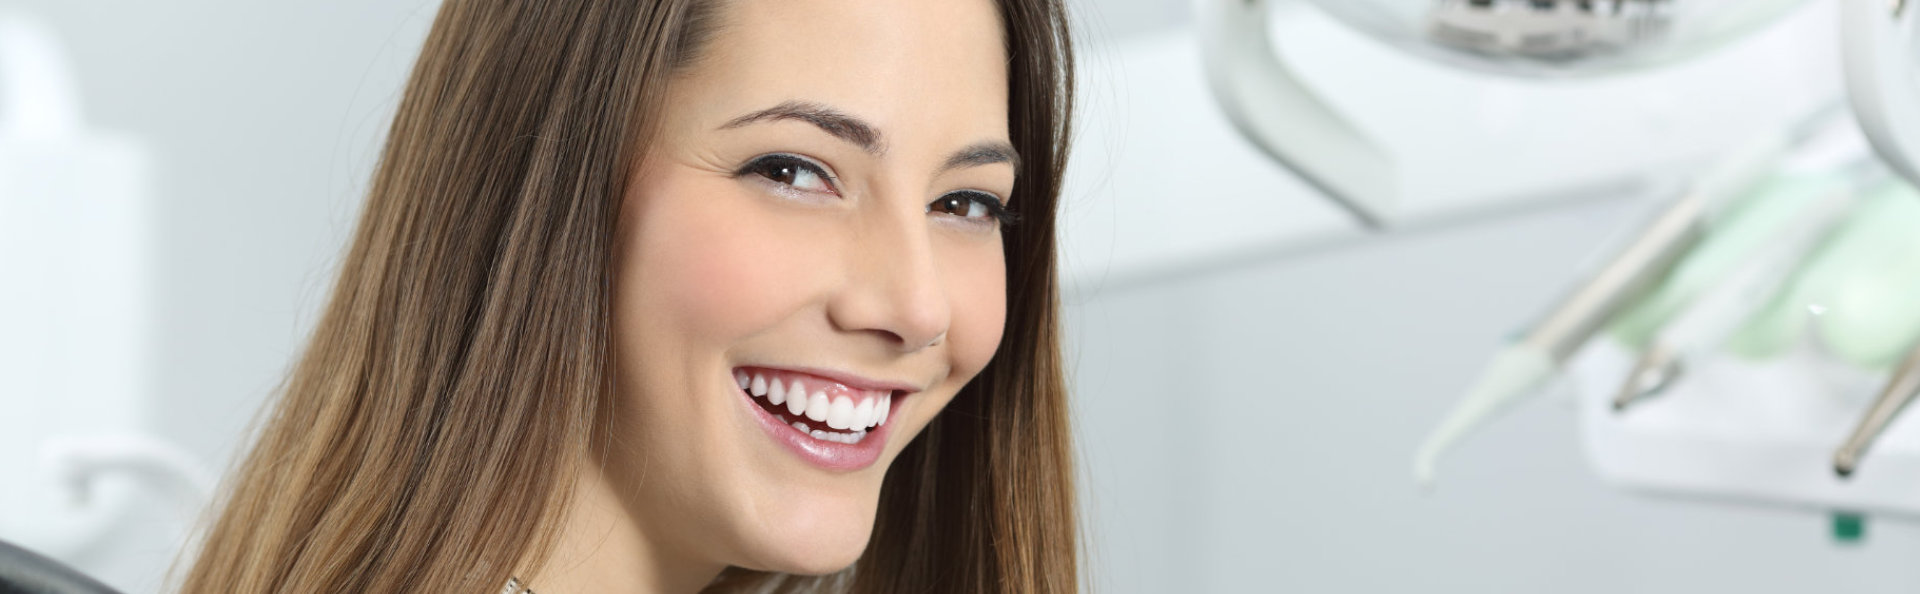 A beautiful woman is smiling after laser dentistry